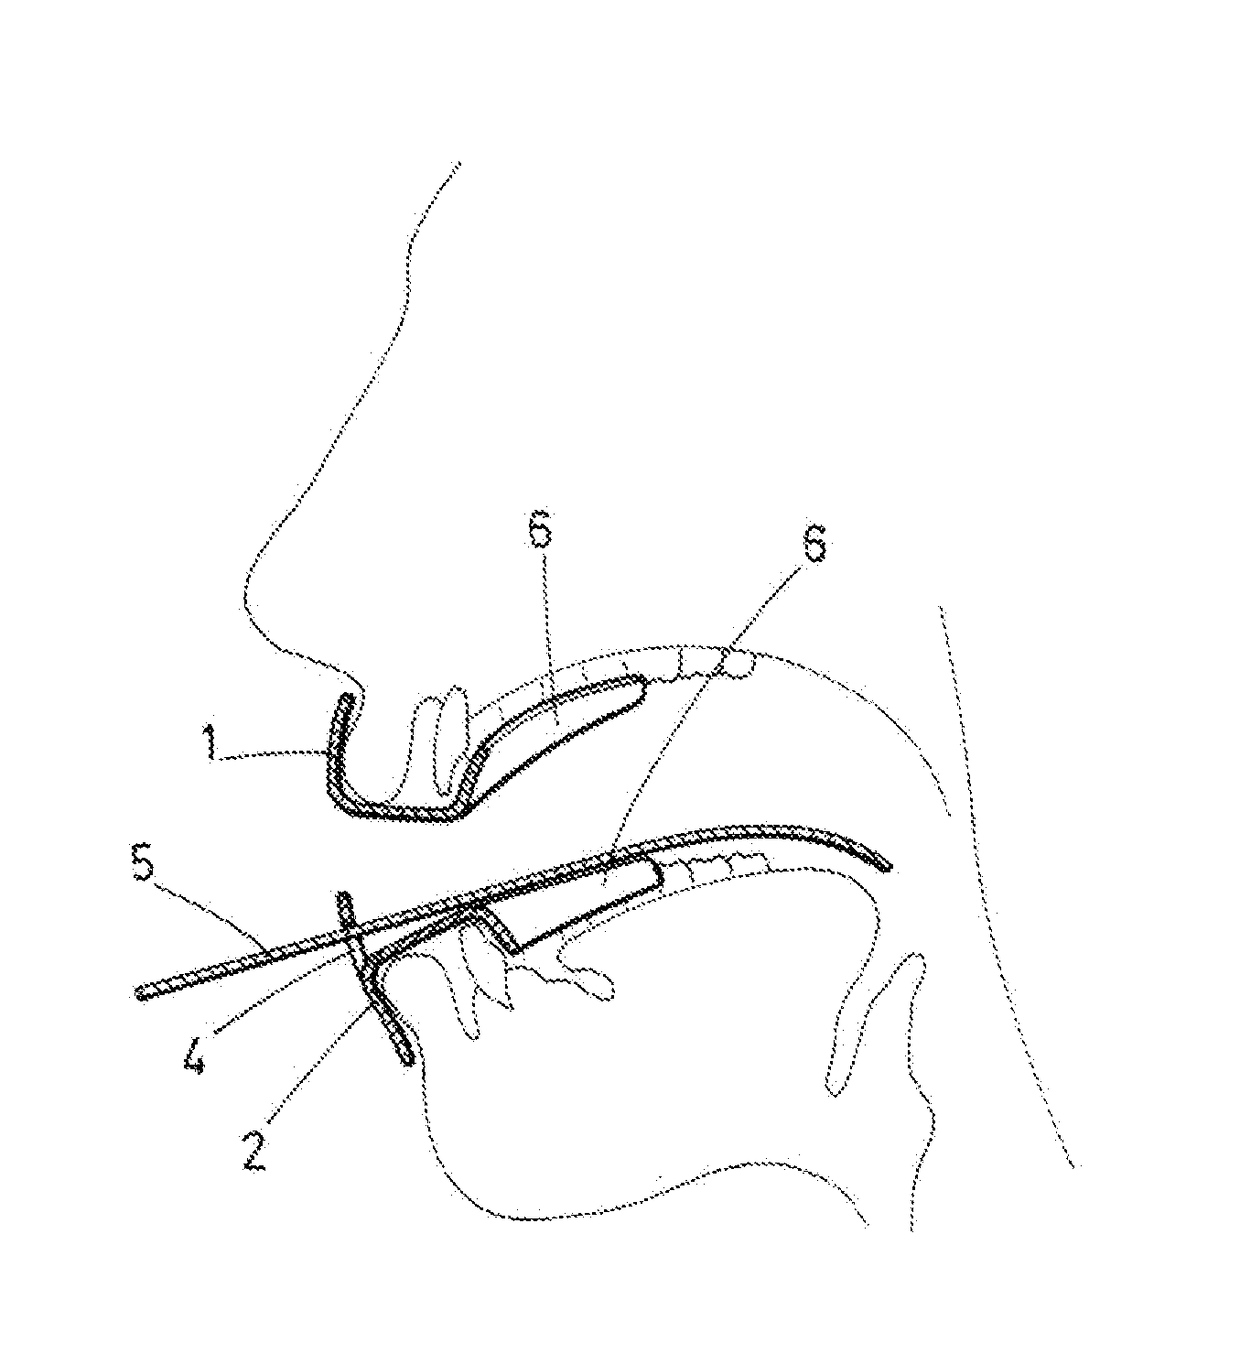 Mouth protector device with tongue depressor